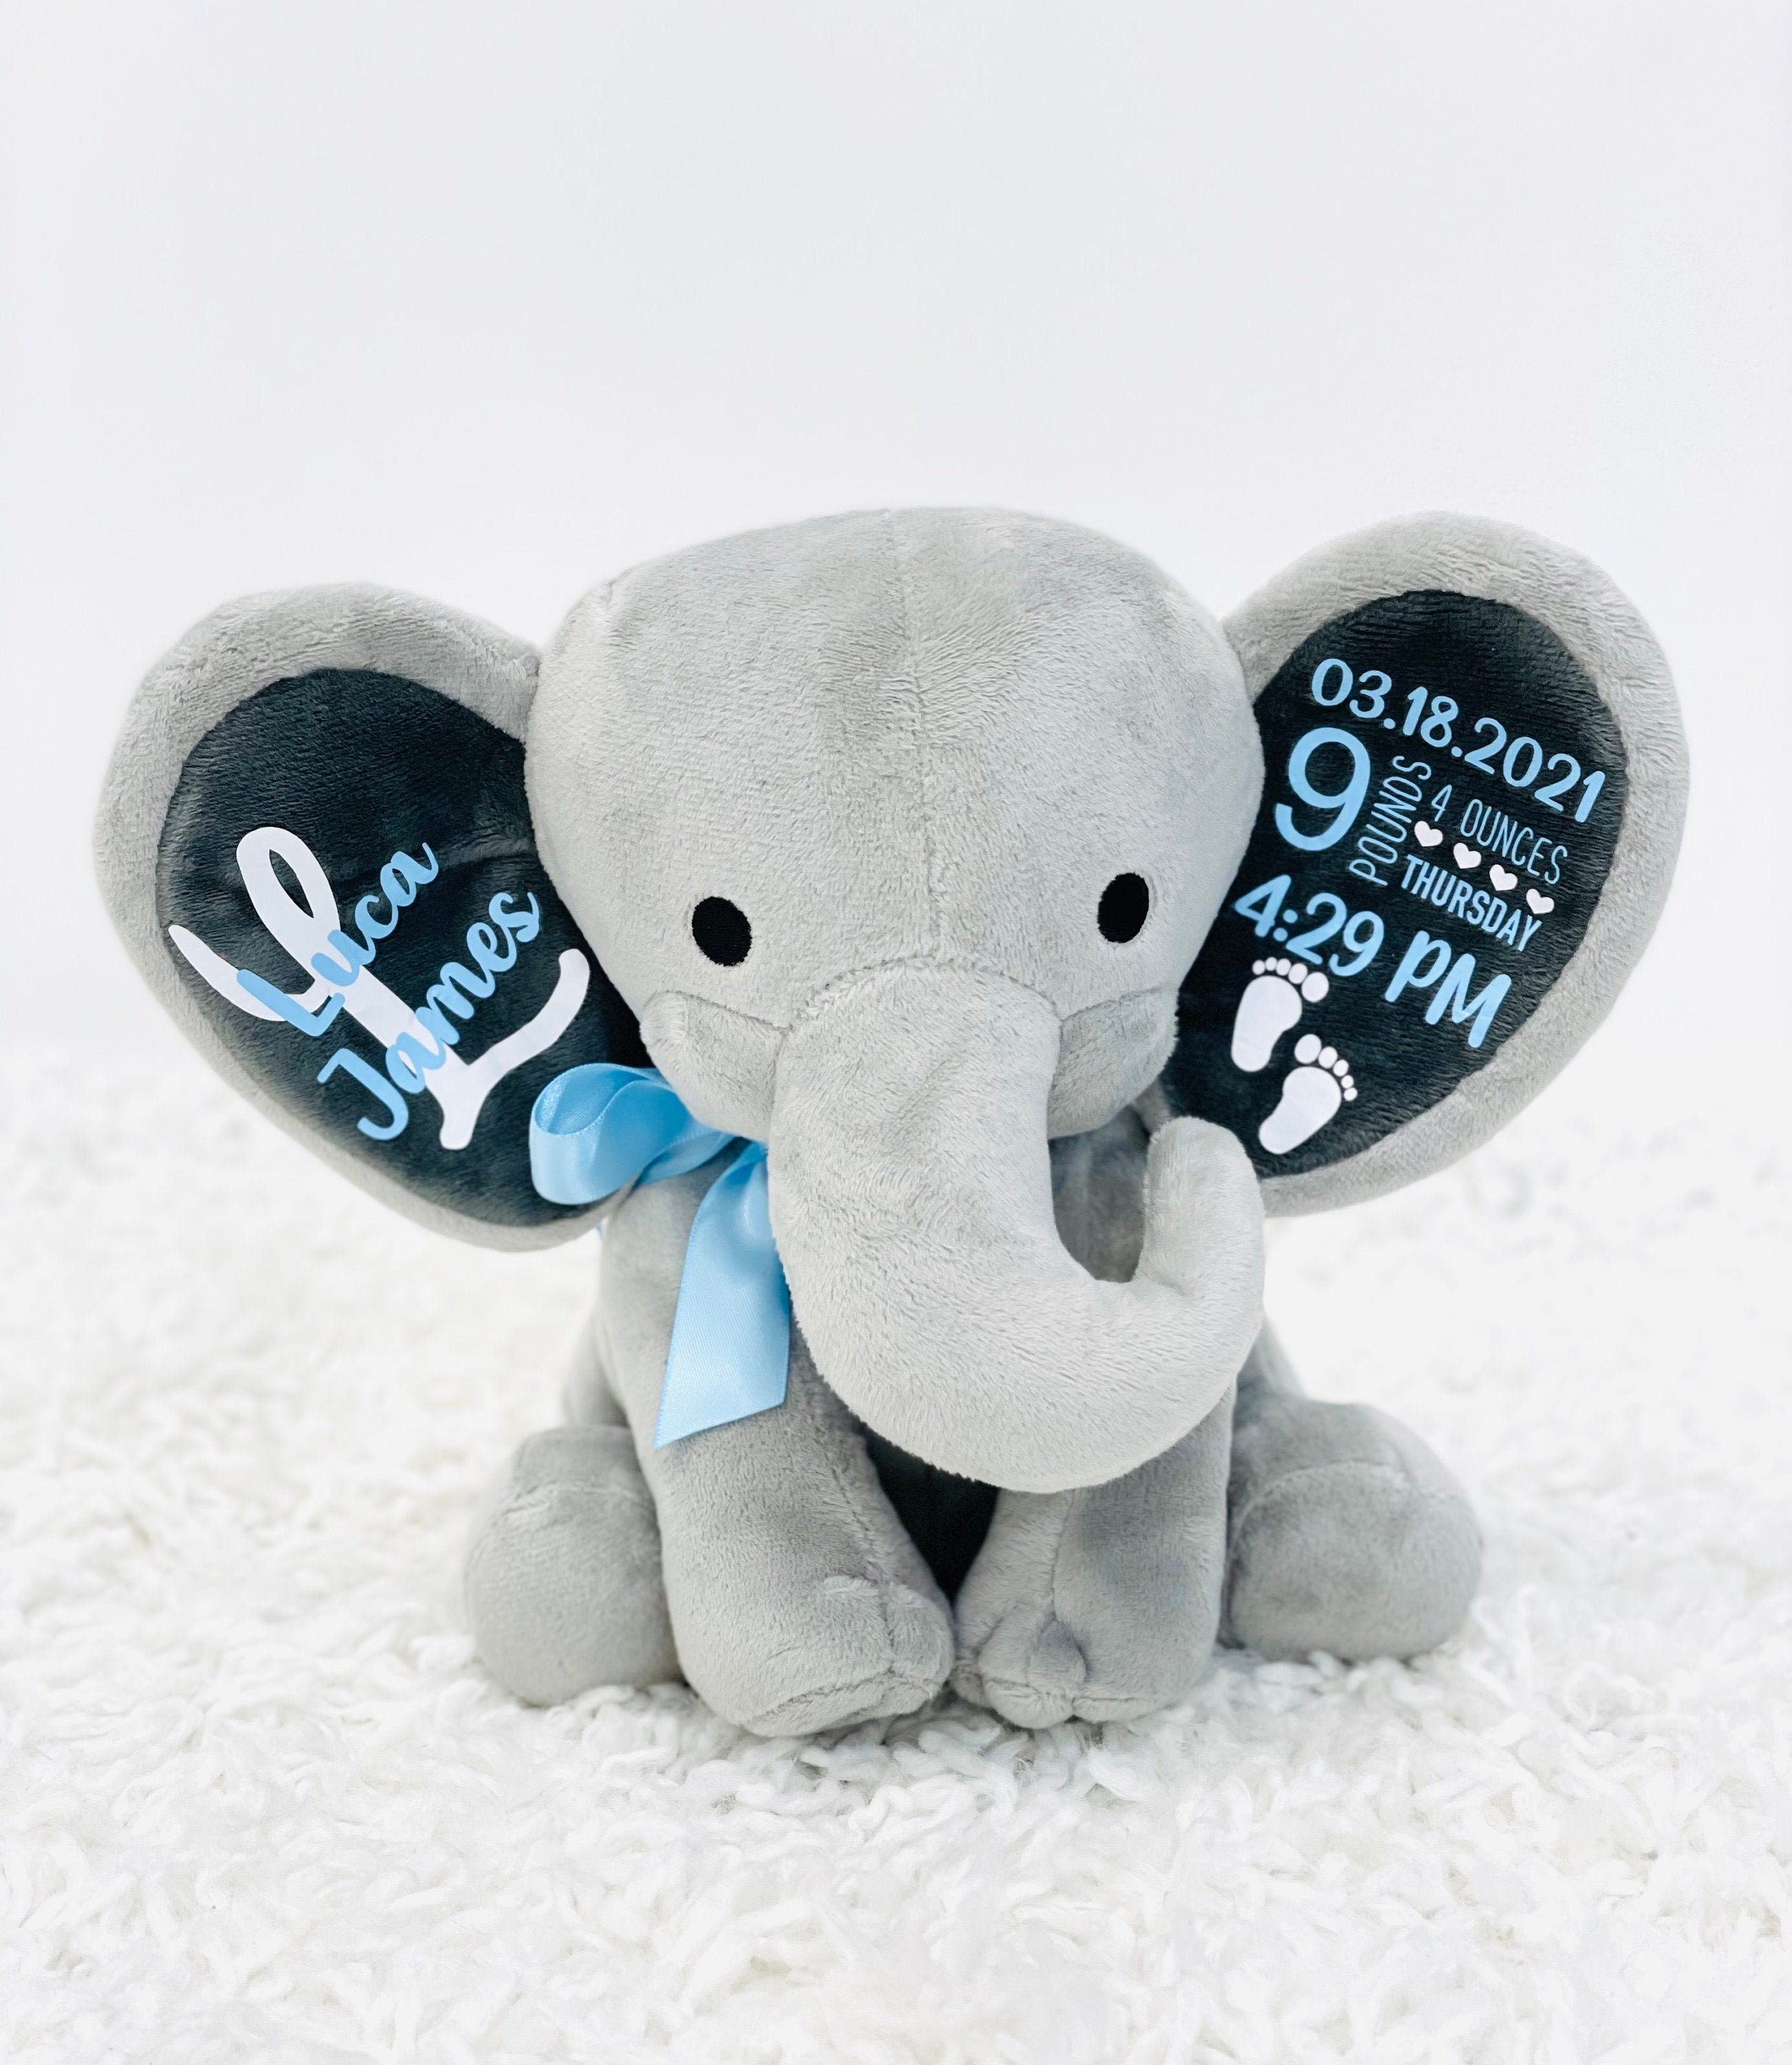 Personalized Decorative 9 Stuffed Plush Grey Elephant Great for Baby Shower or Birthday Gift. 